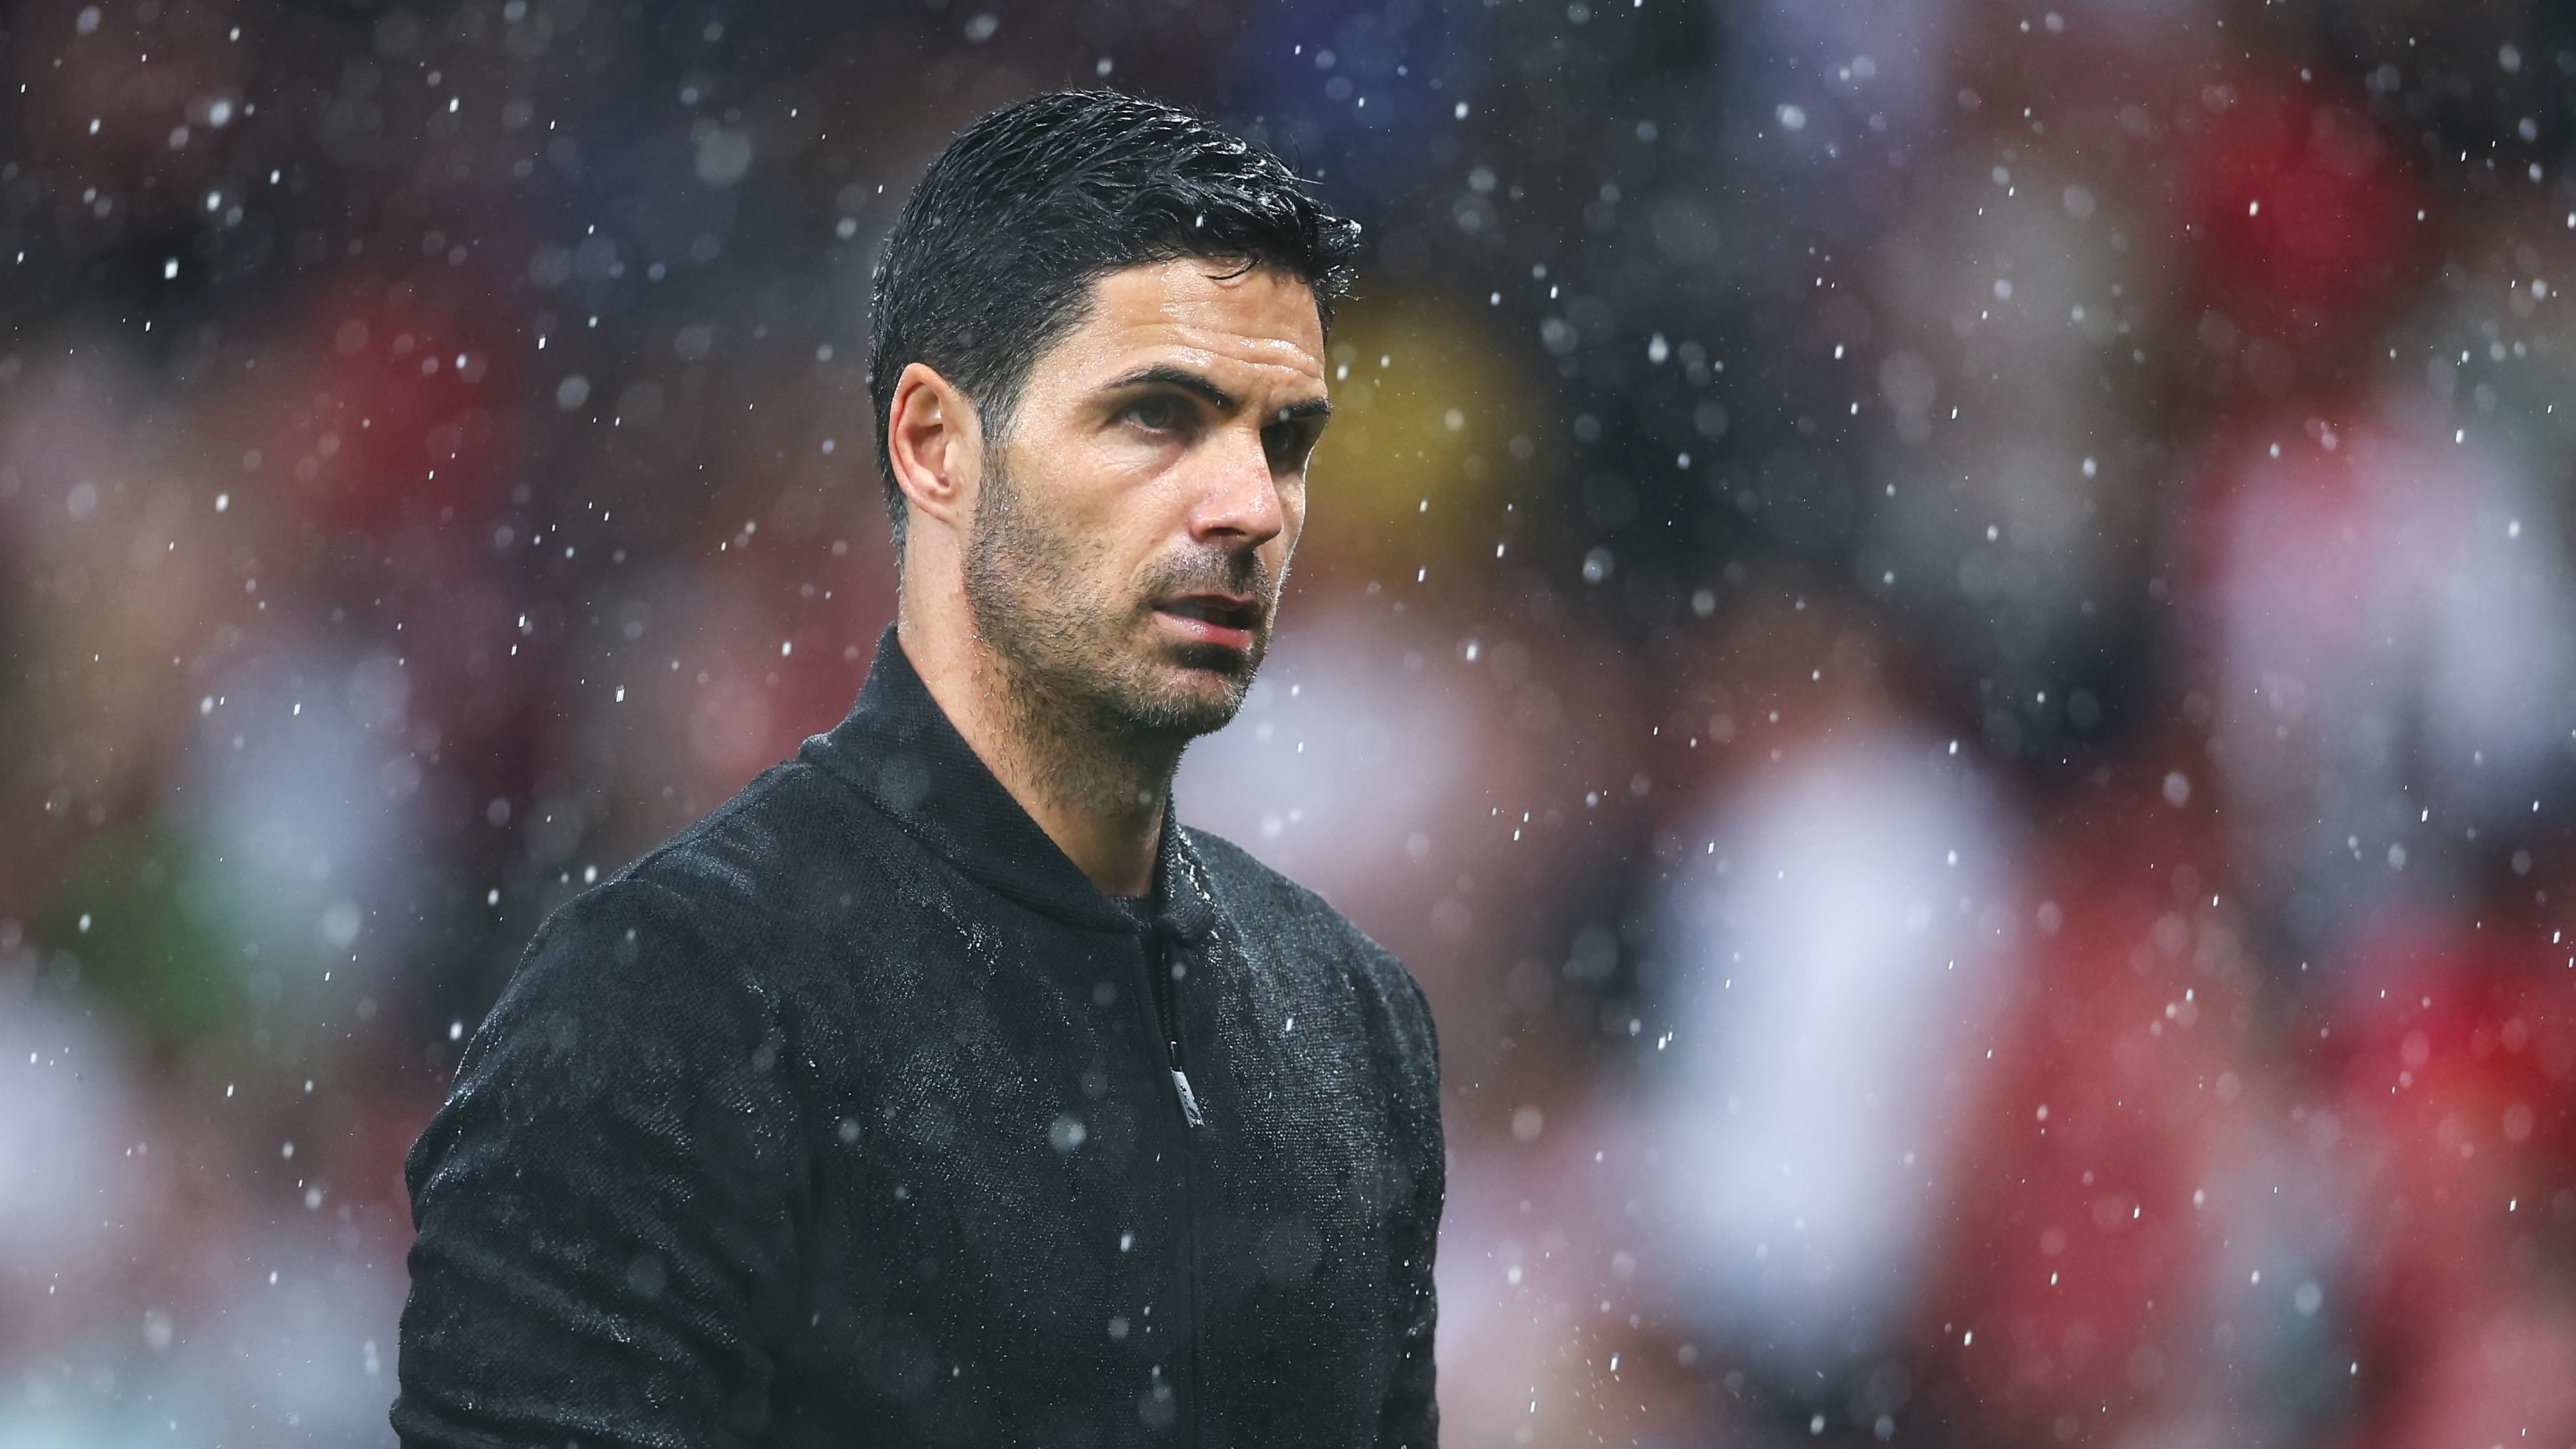 'We weren't composed' - Mikel Arteta critical of Arsenal's performance in Man Utd win